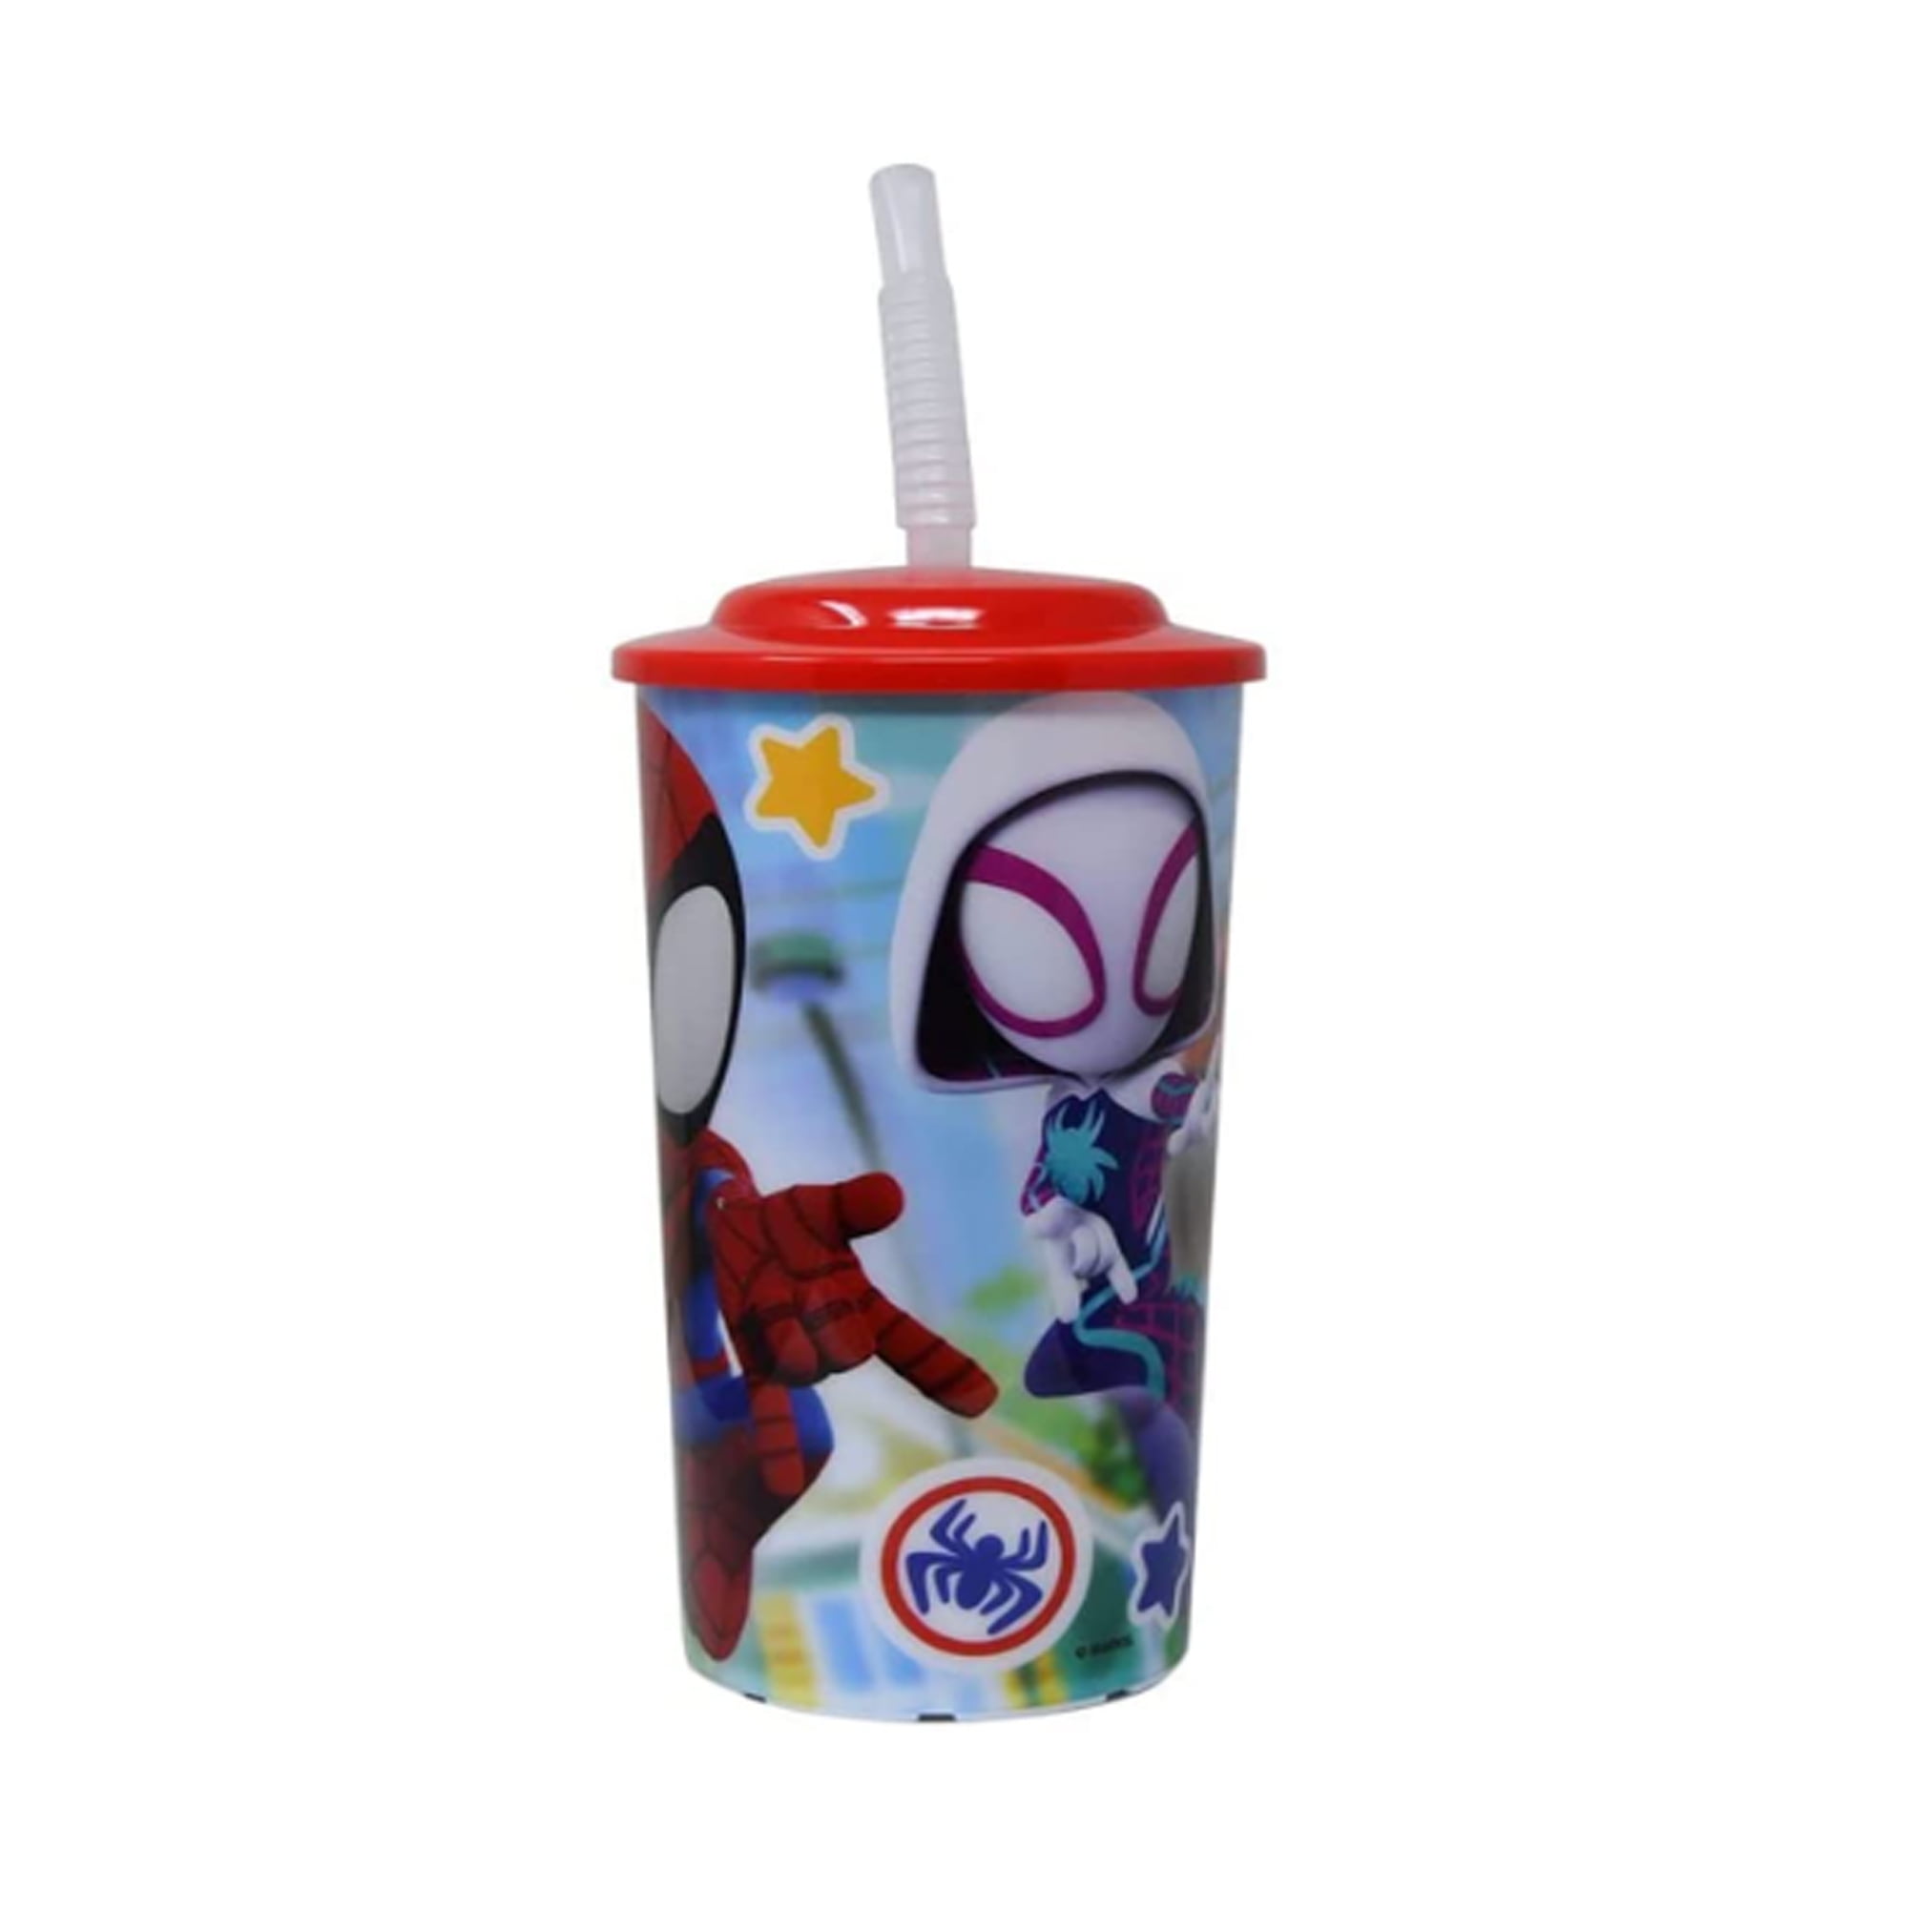 Marvel Spiderman Sip A Cup 2 Pack BUILT-IN STRAW Kids Drink Cup Tumbler BPA  FREE